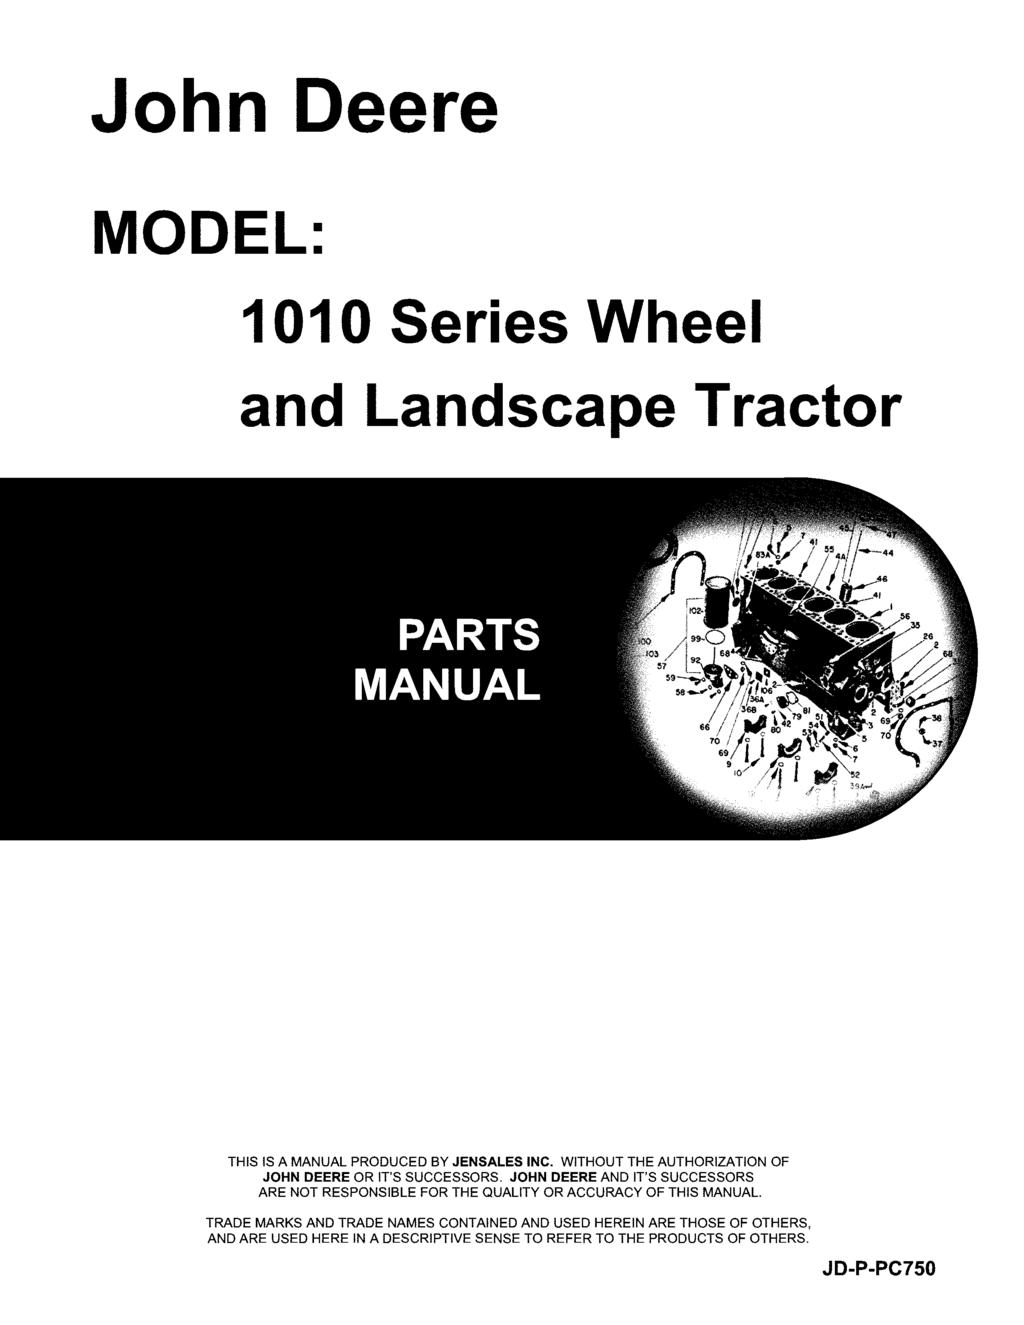 John Deere MODEL: 1010 Series Wheel and Landscape ractor HIS IS A MANUAL PRODUCED BY JENSALES INC. WIHOU HE AUHORIZAION OF JOHN DEERE OR I'S SUCCESSORS.